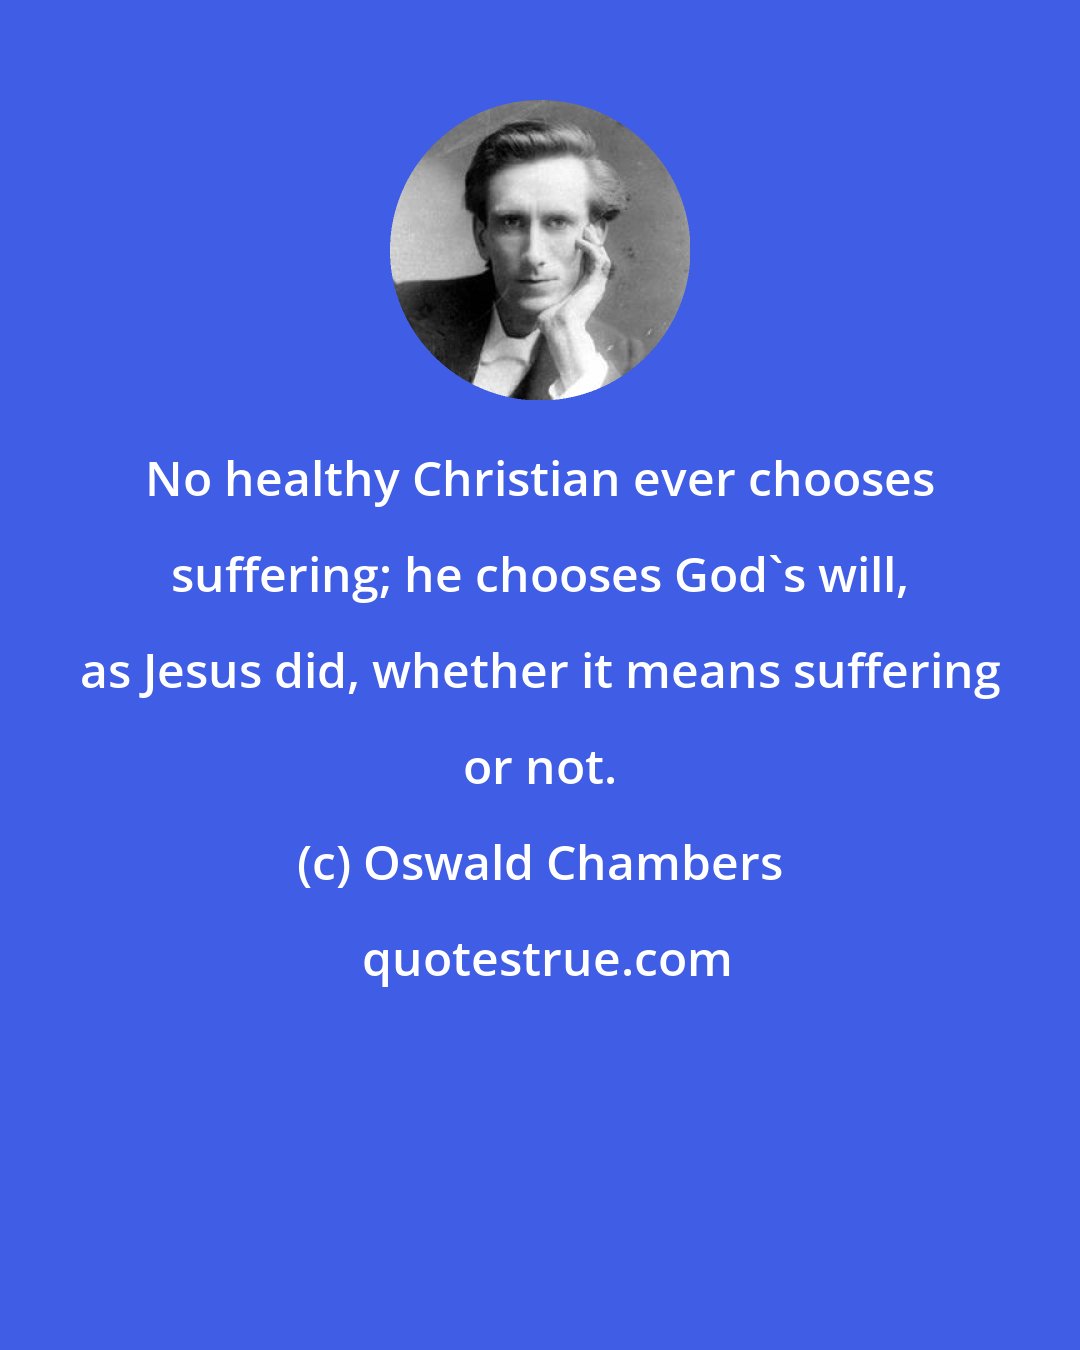 Oswald Chambers: No healthy Christian ever chooses suffering; he chooses God's will, as Jesus did, whether it means suffering or not.